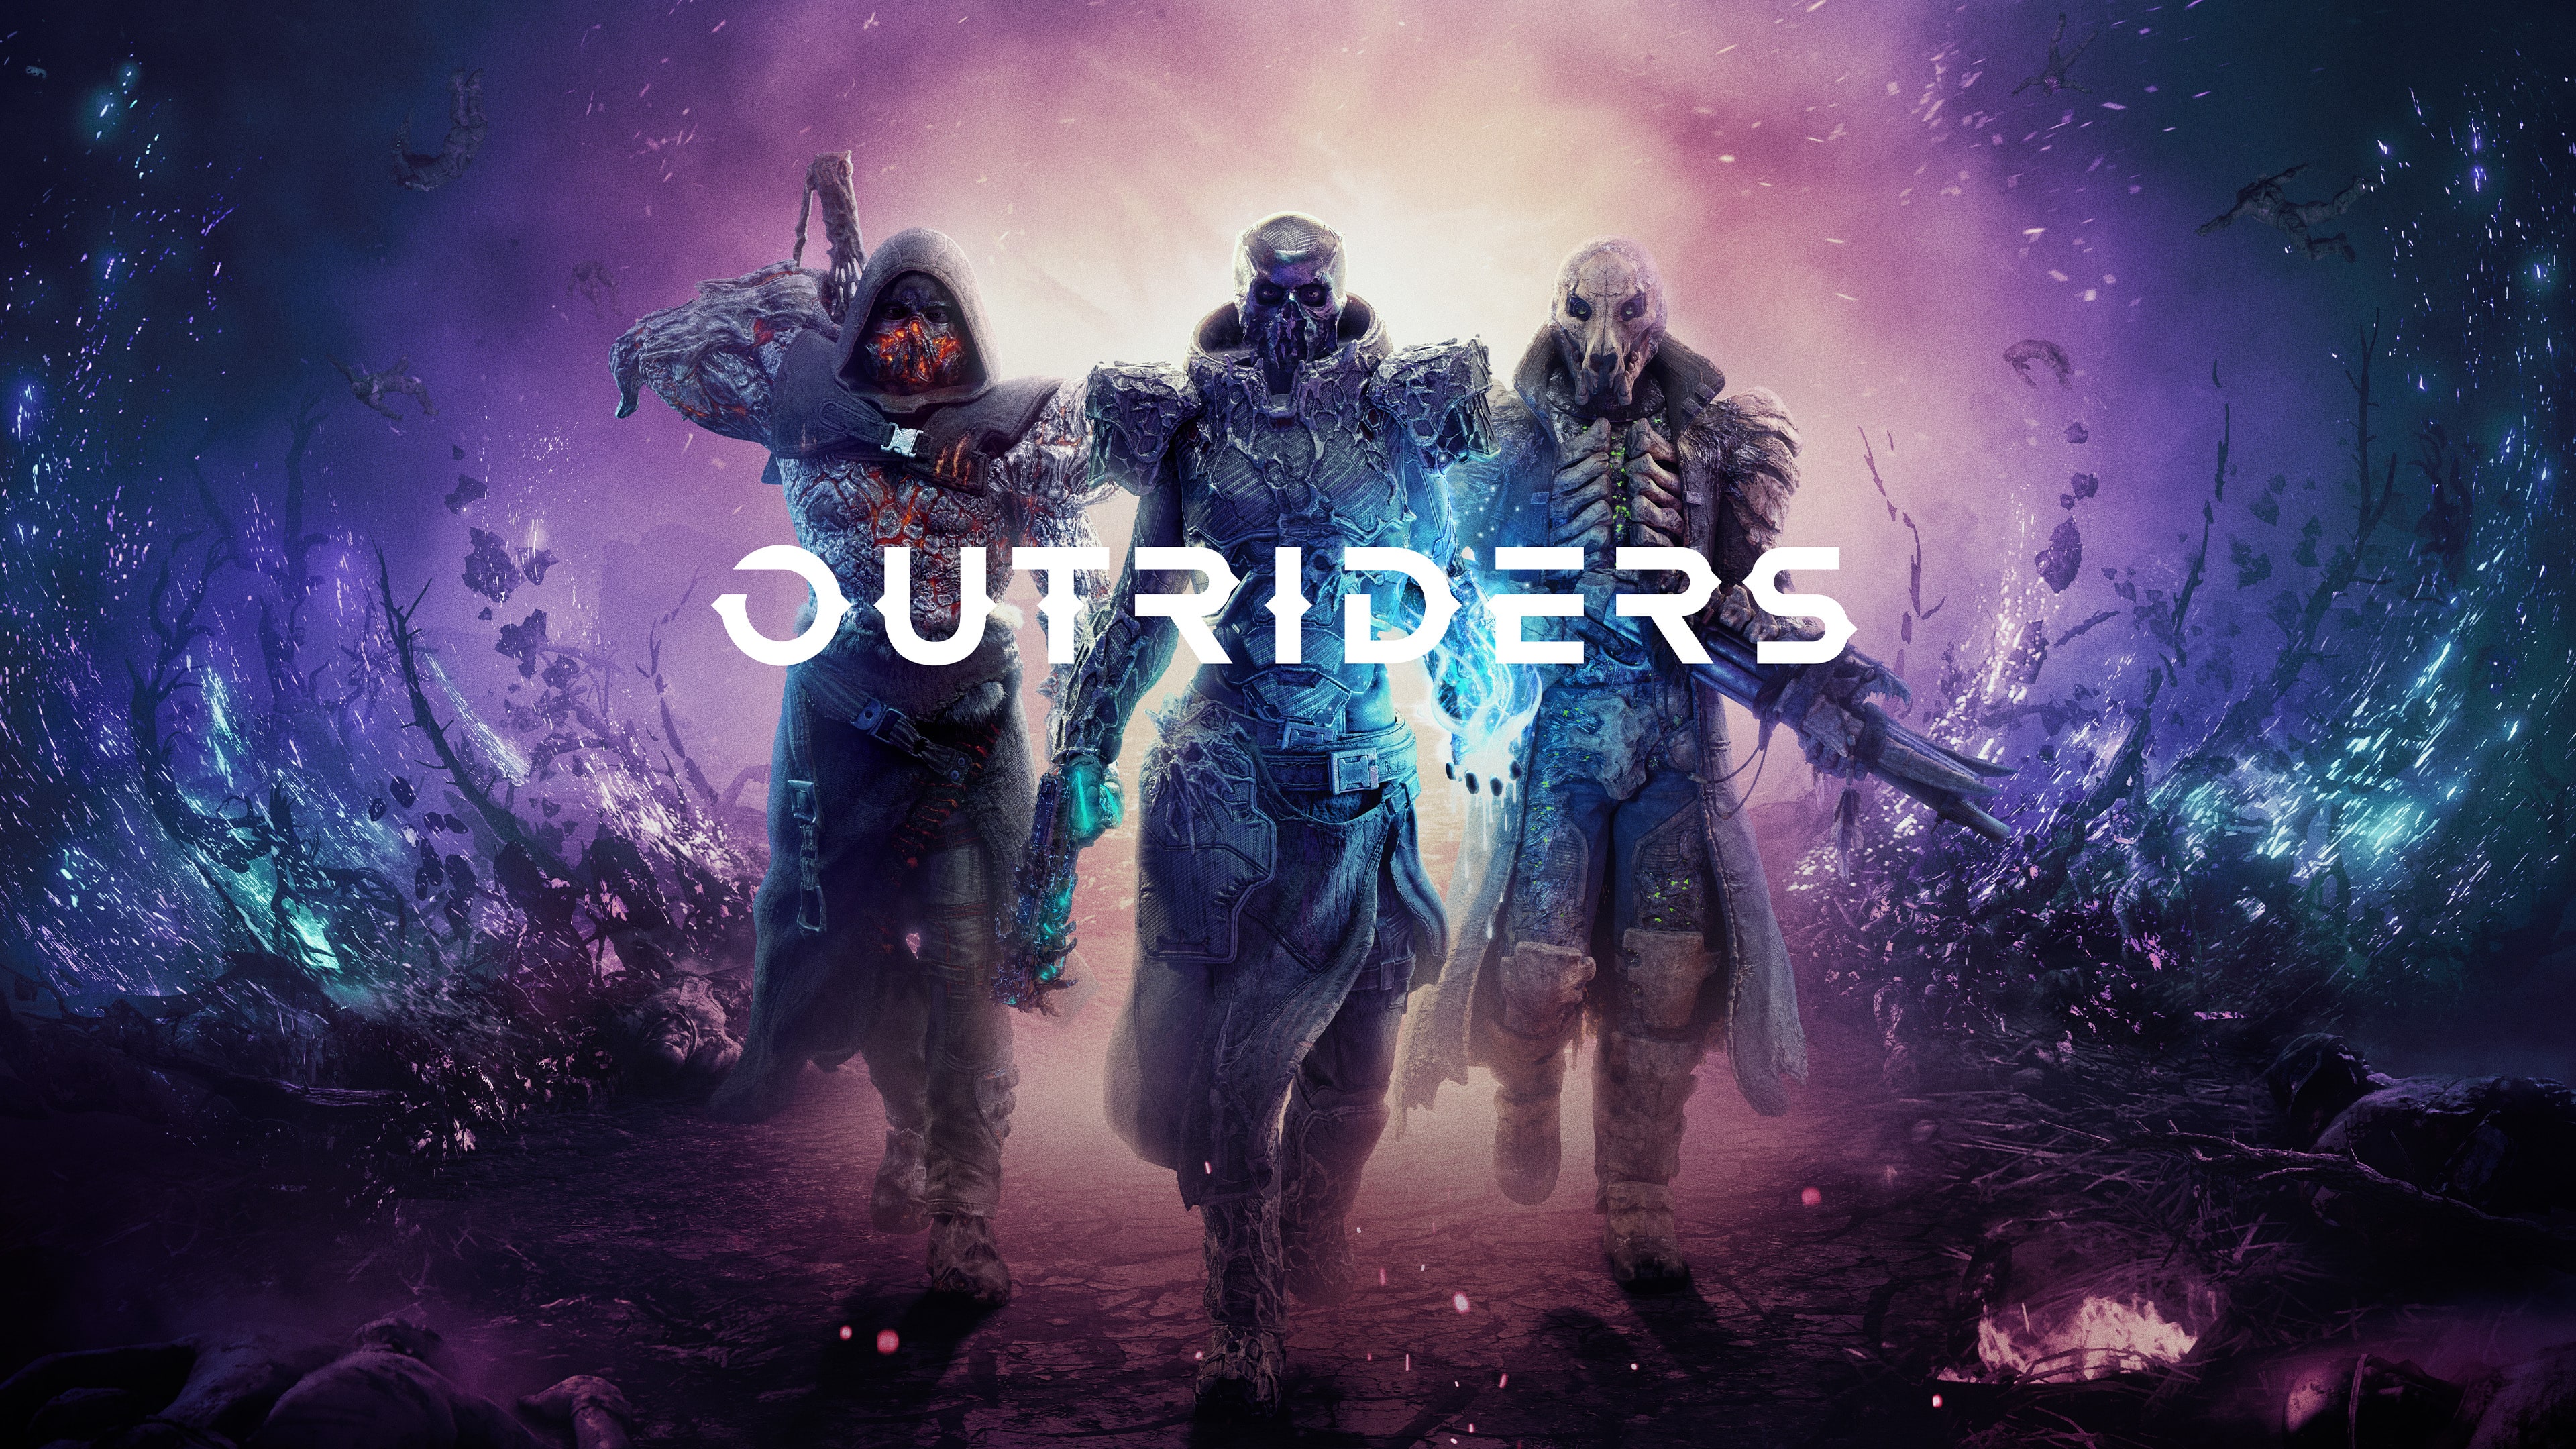 OUTRIDERS PS4 & PS5 (Simplified Chinese, English, Korean, Traditional Chinese)